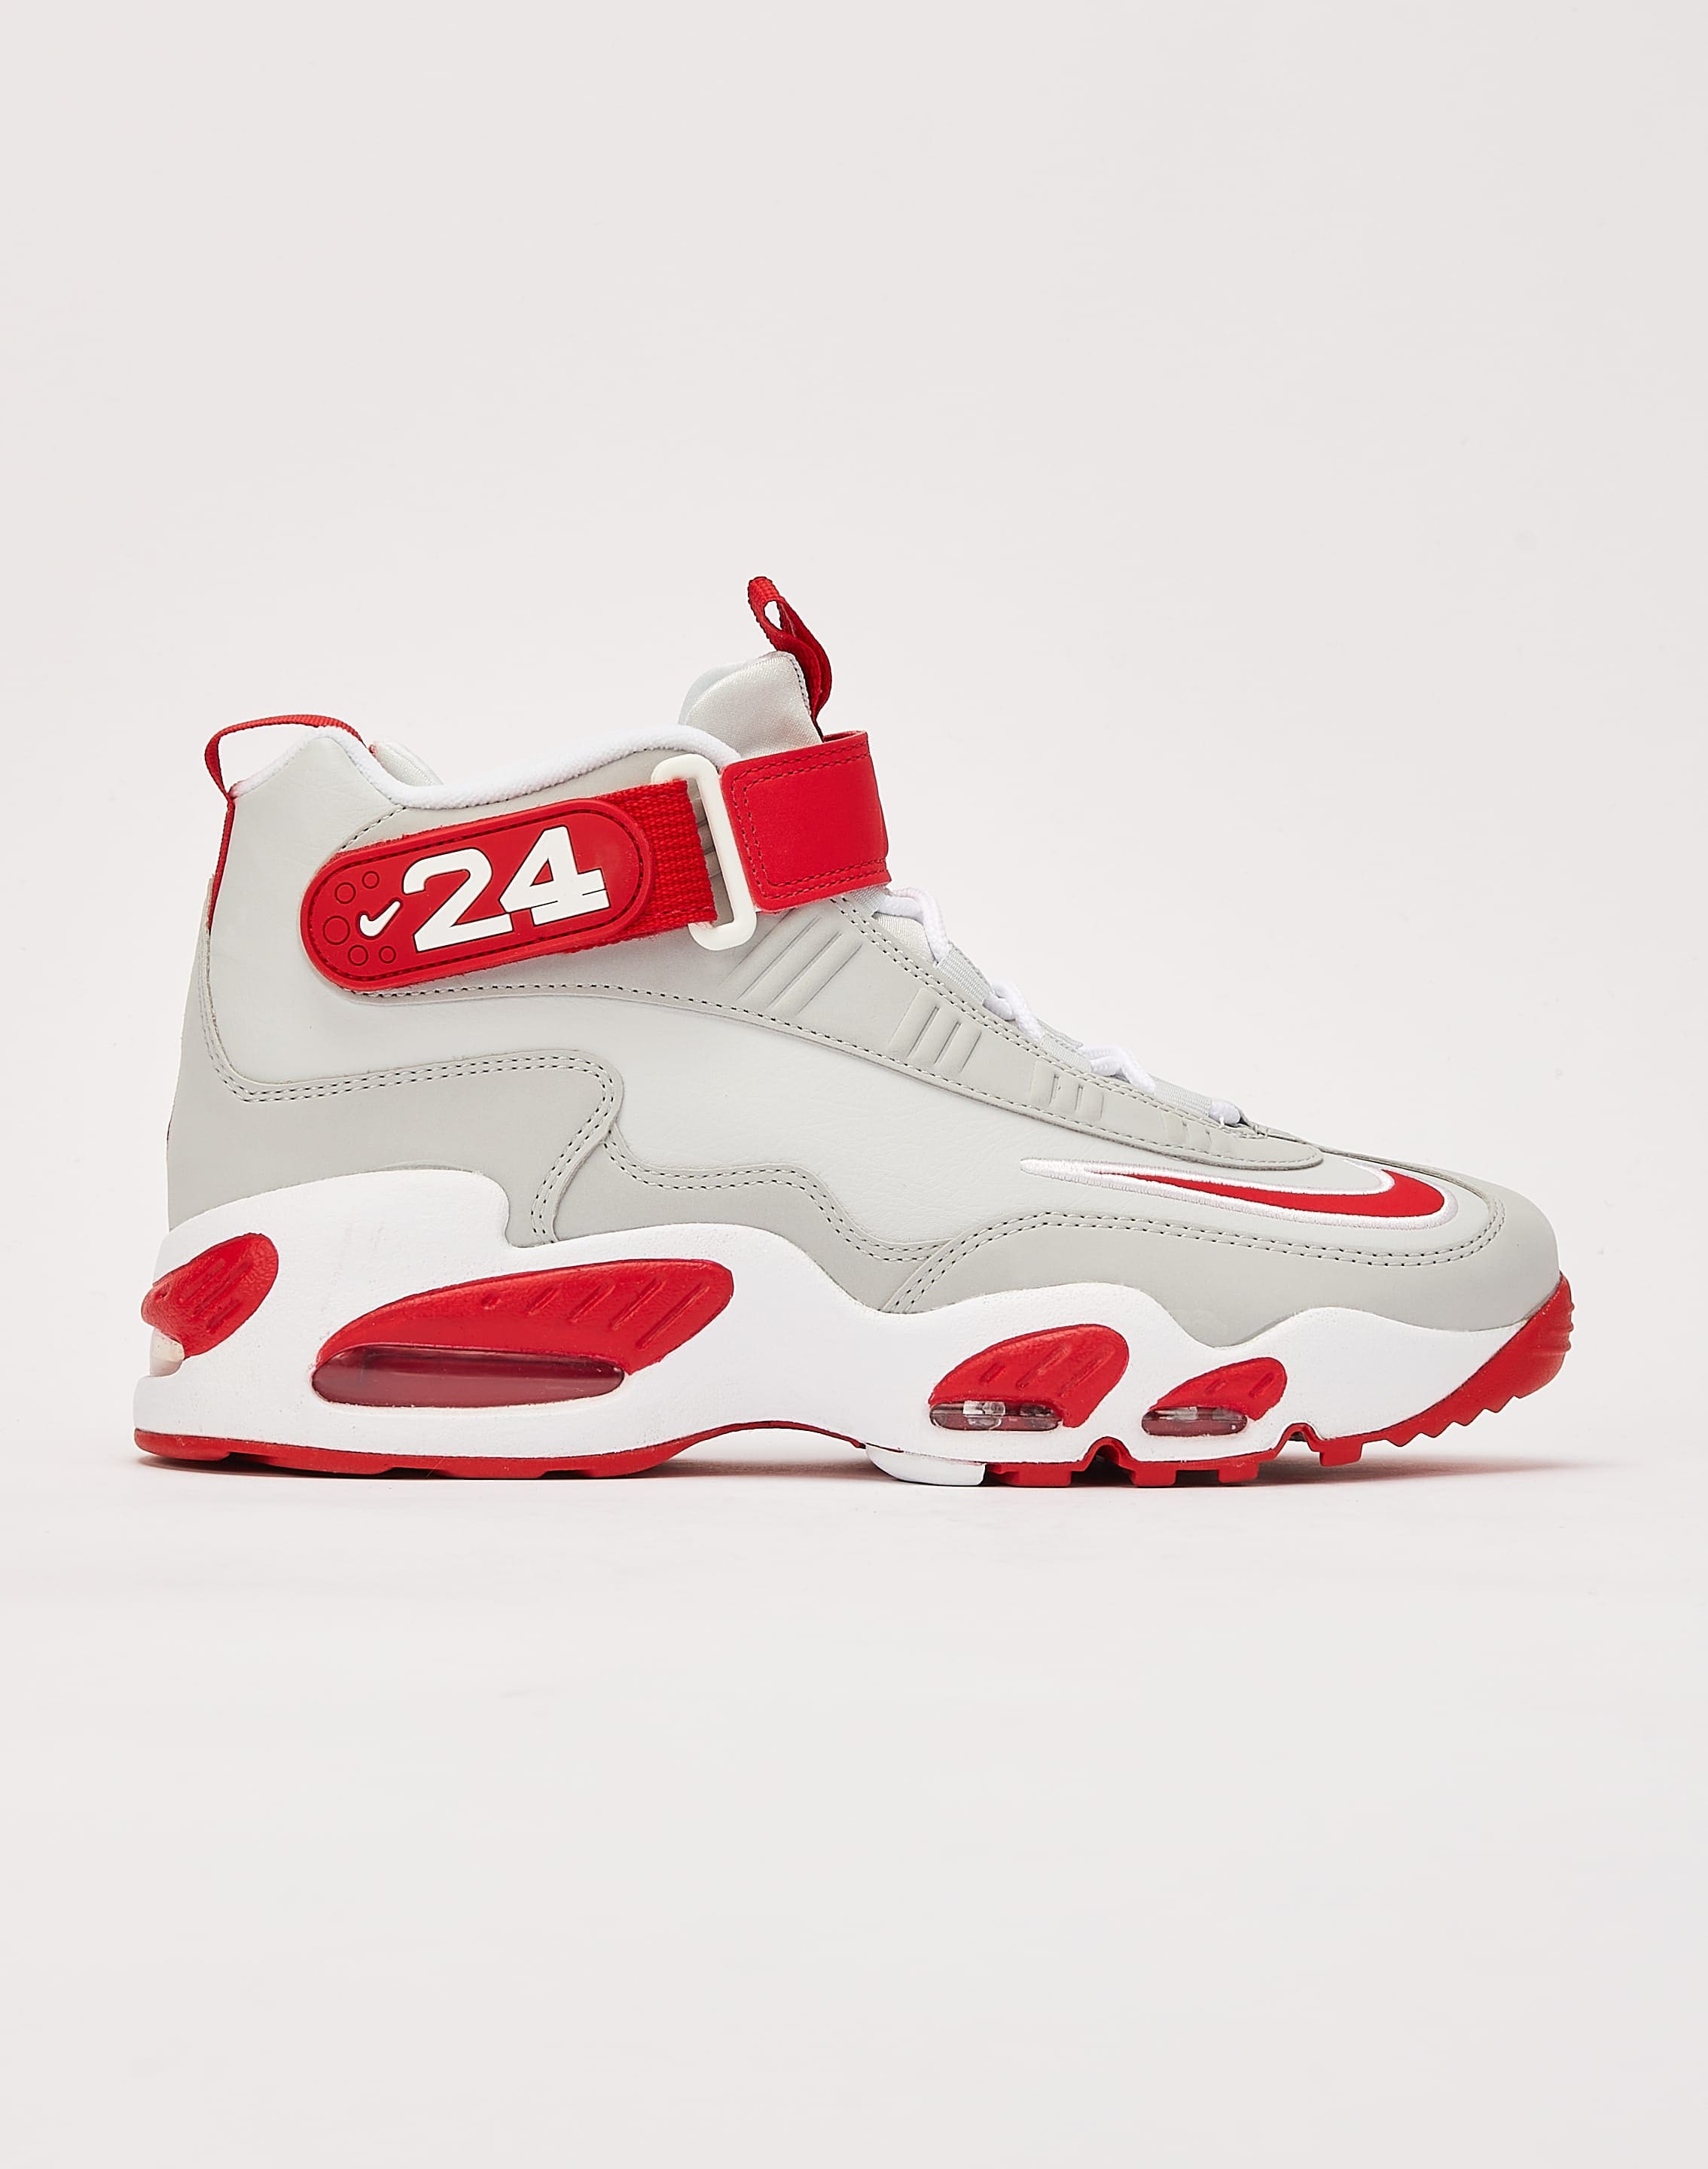 Excelente Mm Corrupto Nike Air Griffey Max 1 – DTLR